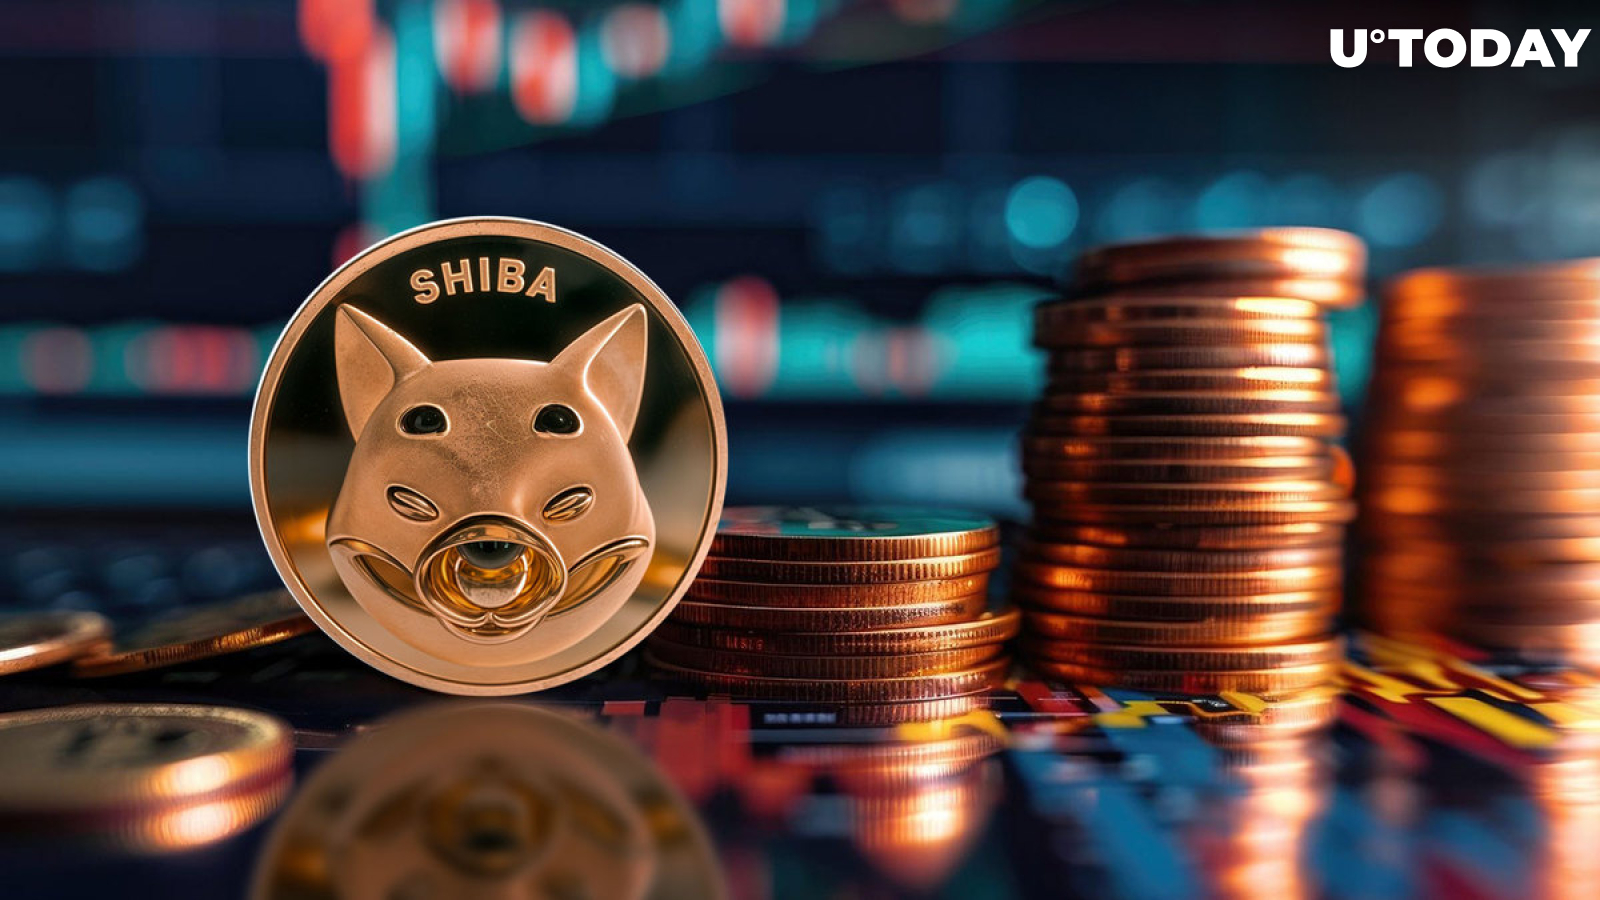 8 Trillion Shiba Inu (SHIB) in 24 Hours: What's Happening?